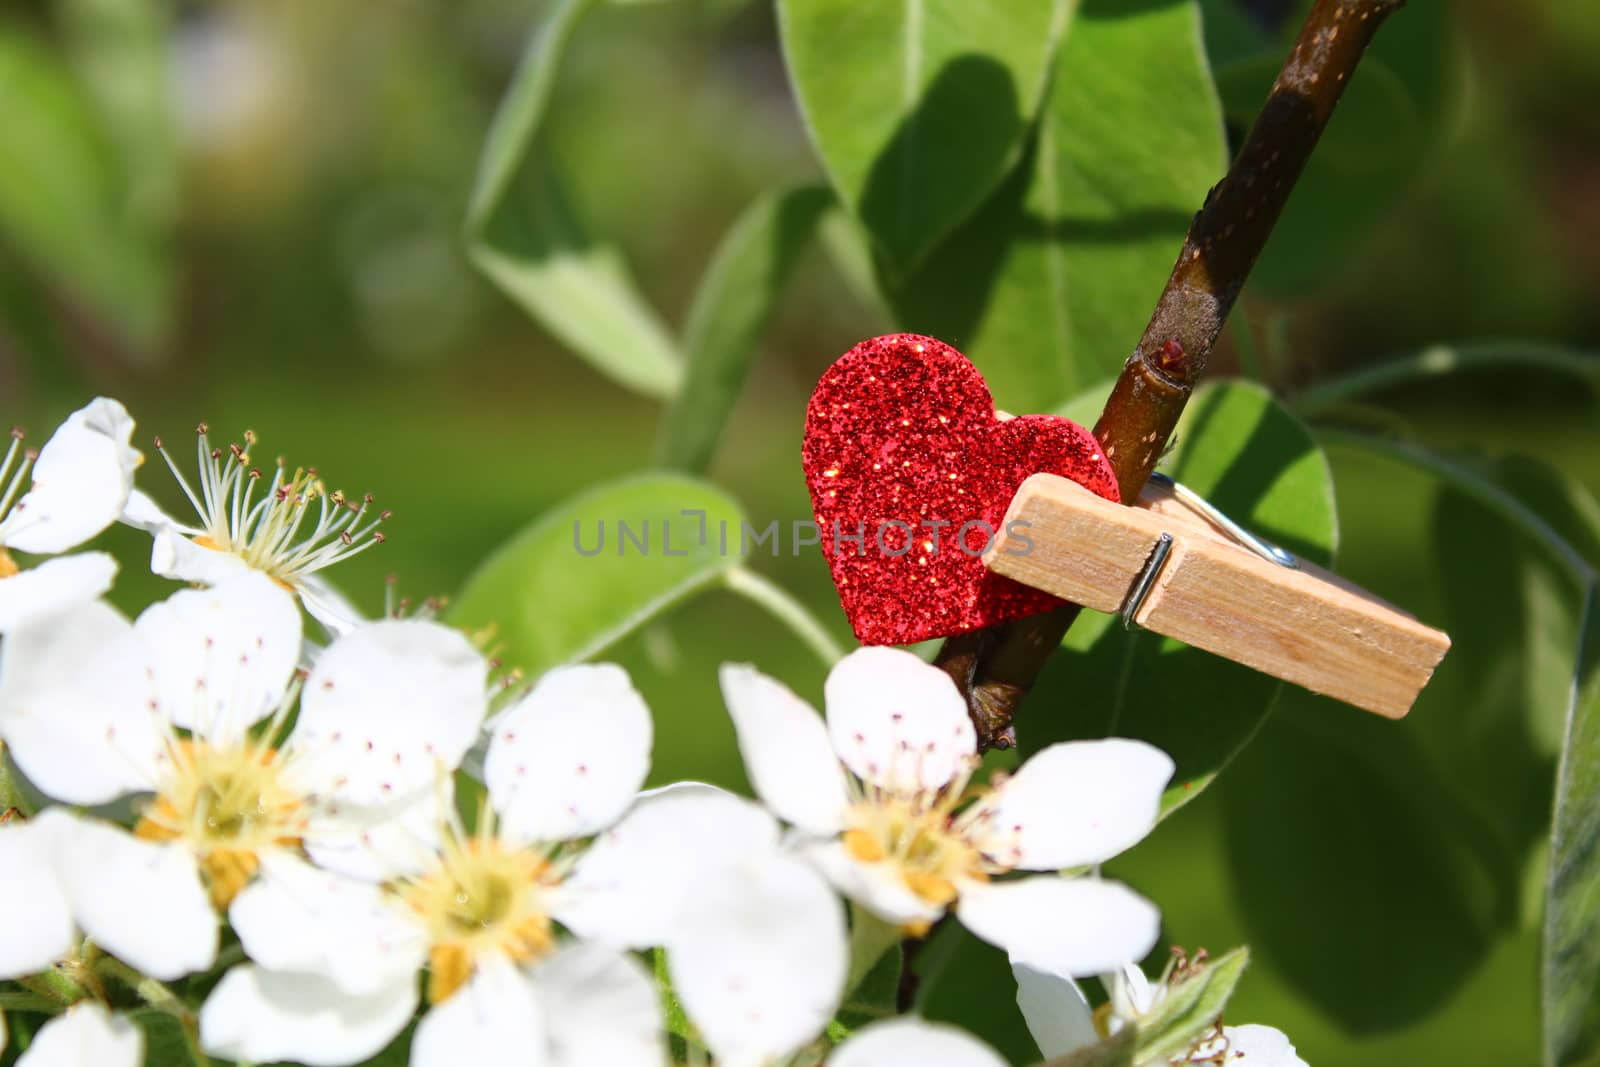 The picture shows a red heart in the pear tree.